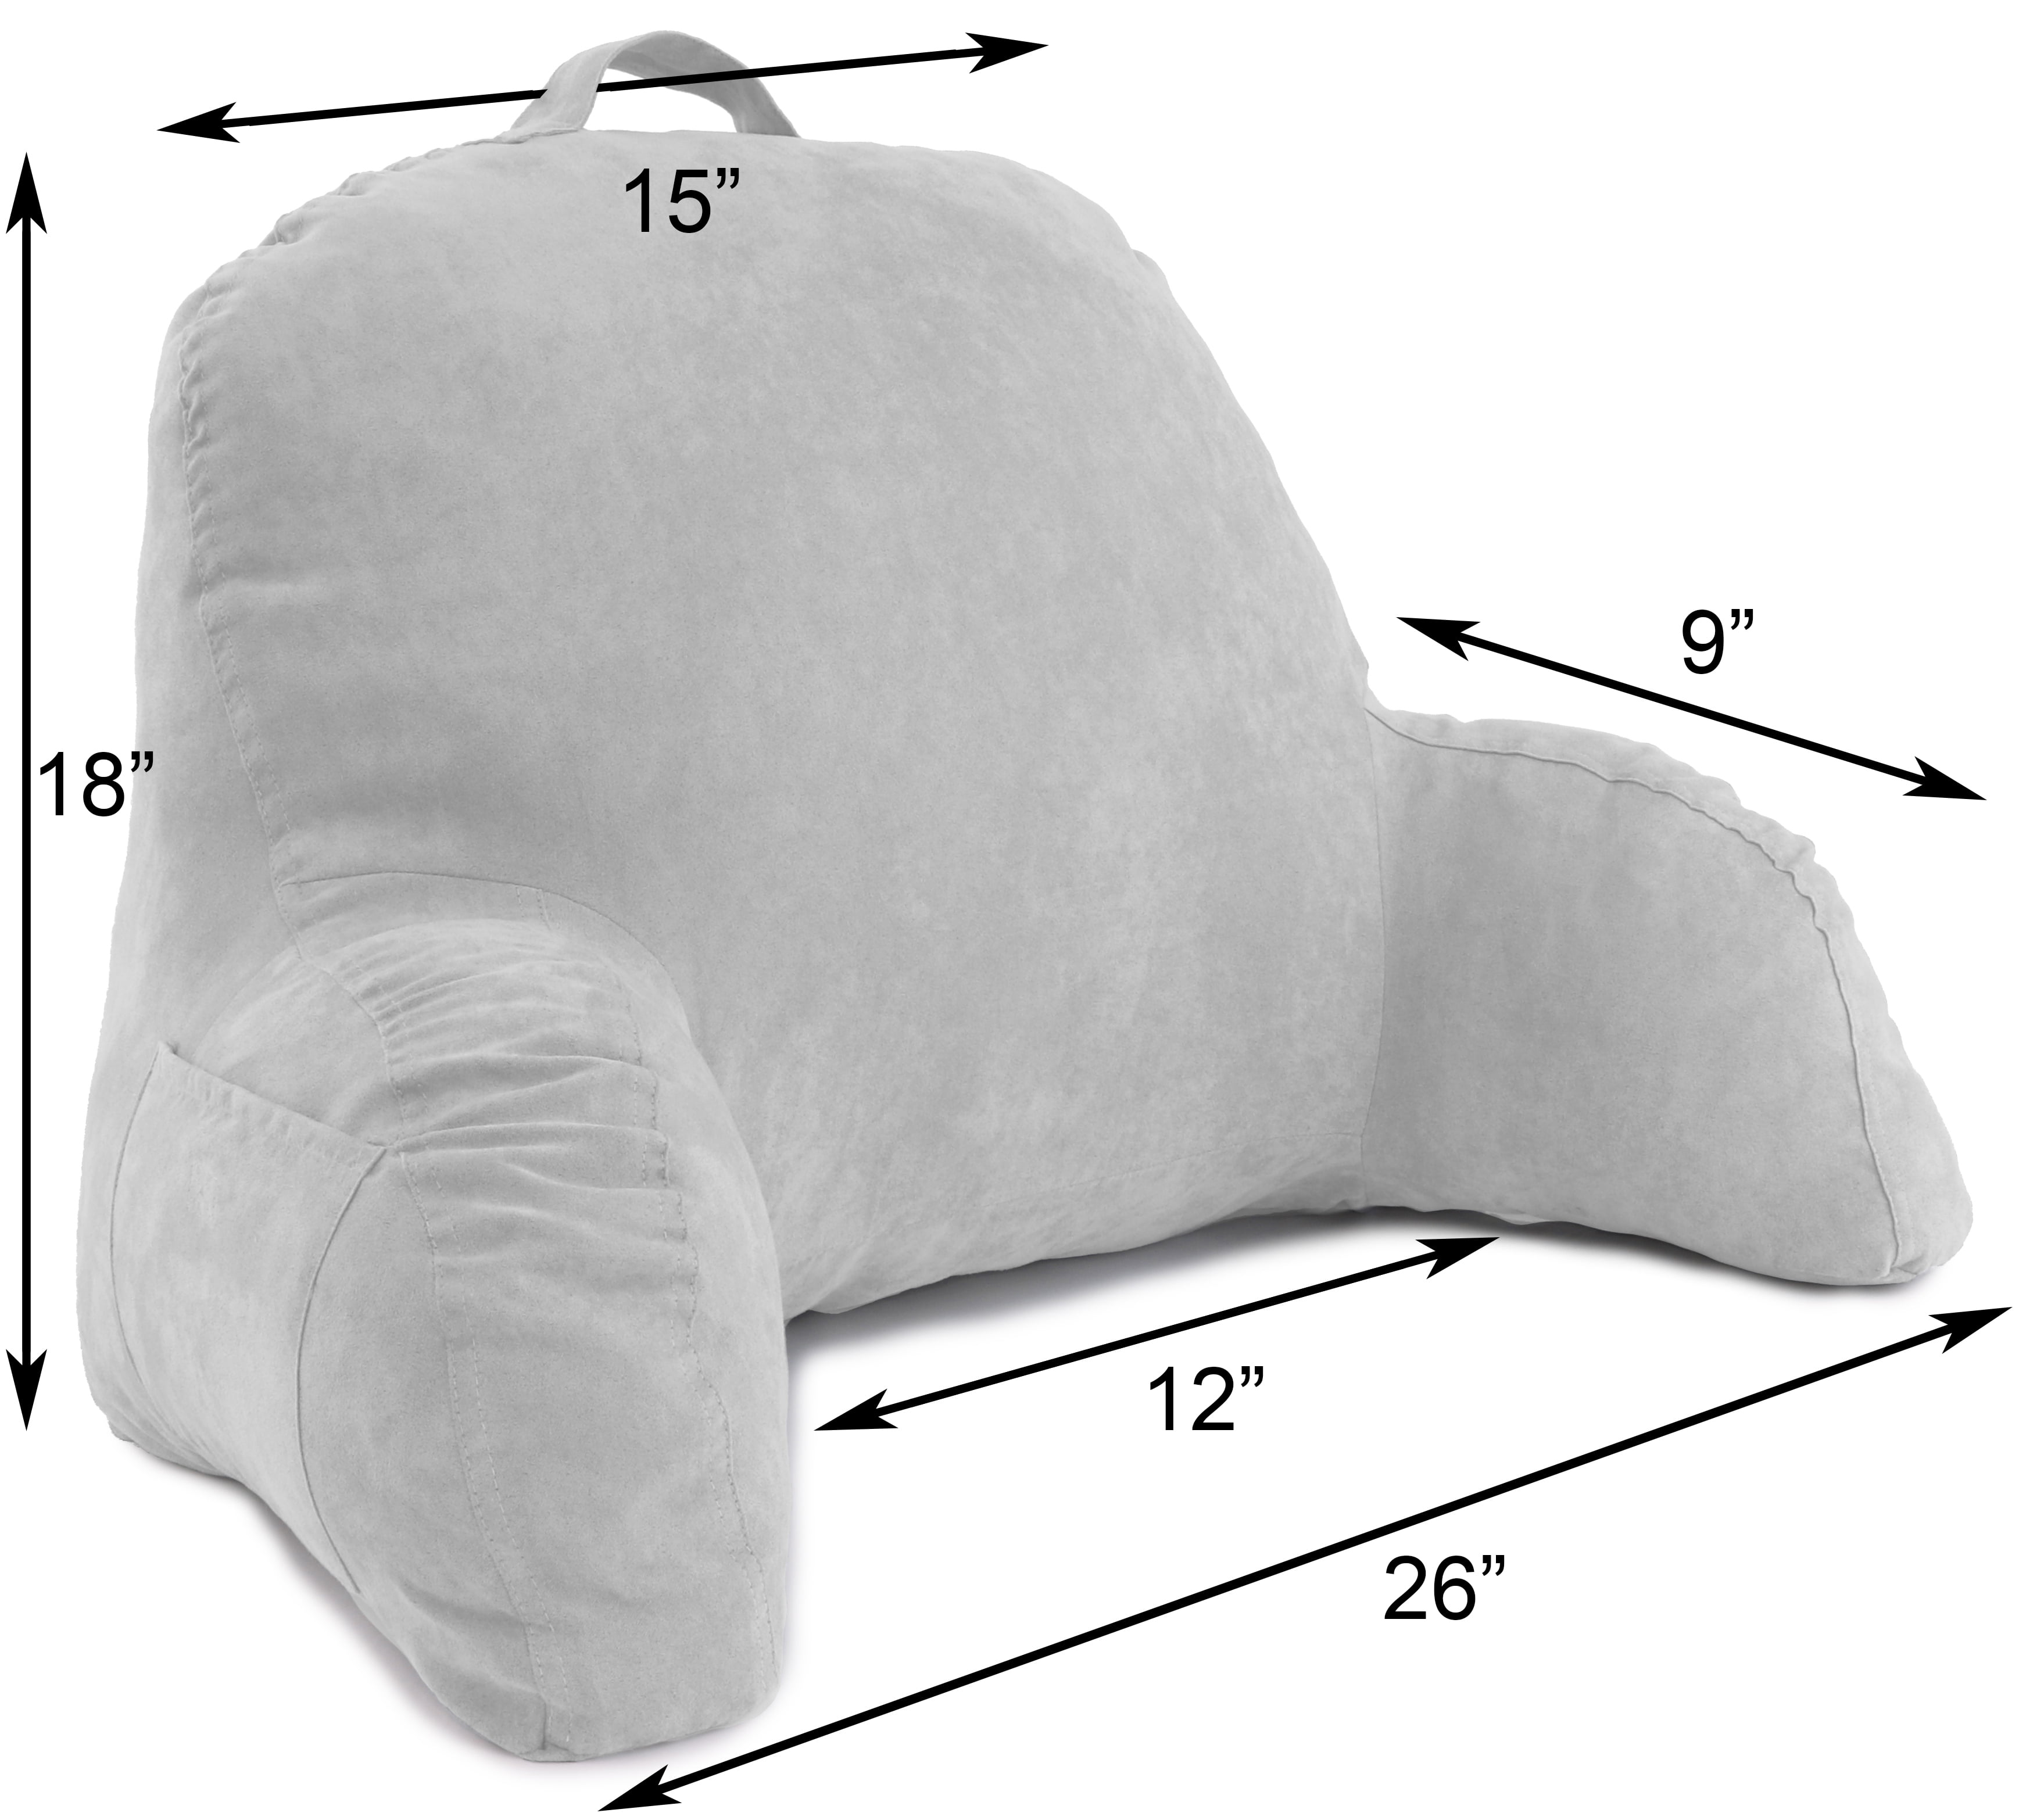 Soft But Firmly Stuffed Fiberfill Reading and Bedrest Lounger Deluxe Comfort Microsuede Bed Rest Backrest Pillow with Arms Black Sitting Supprt Pillow